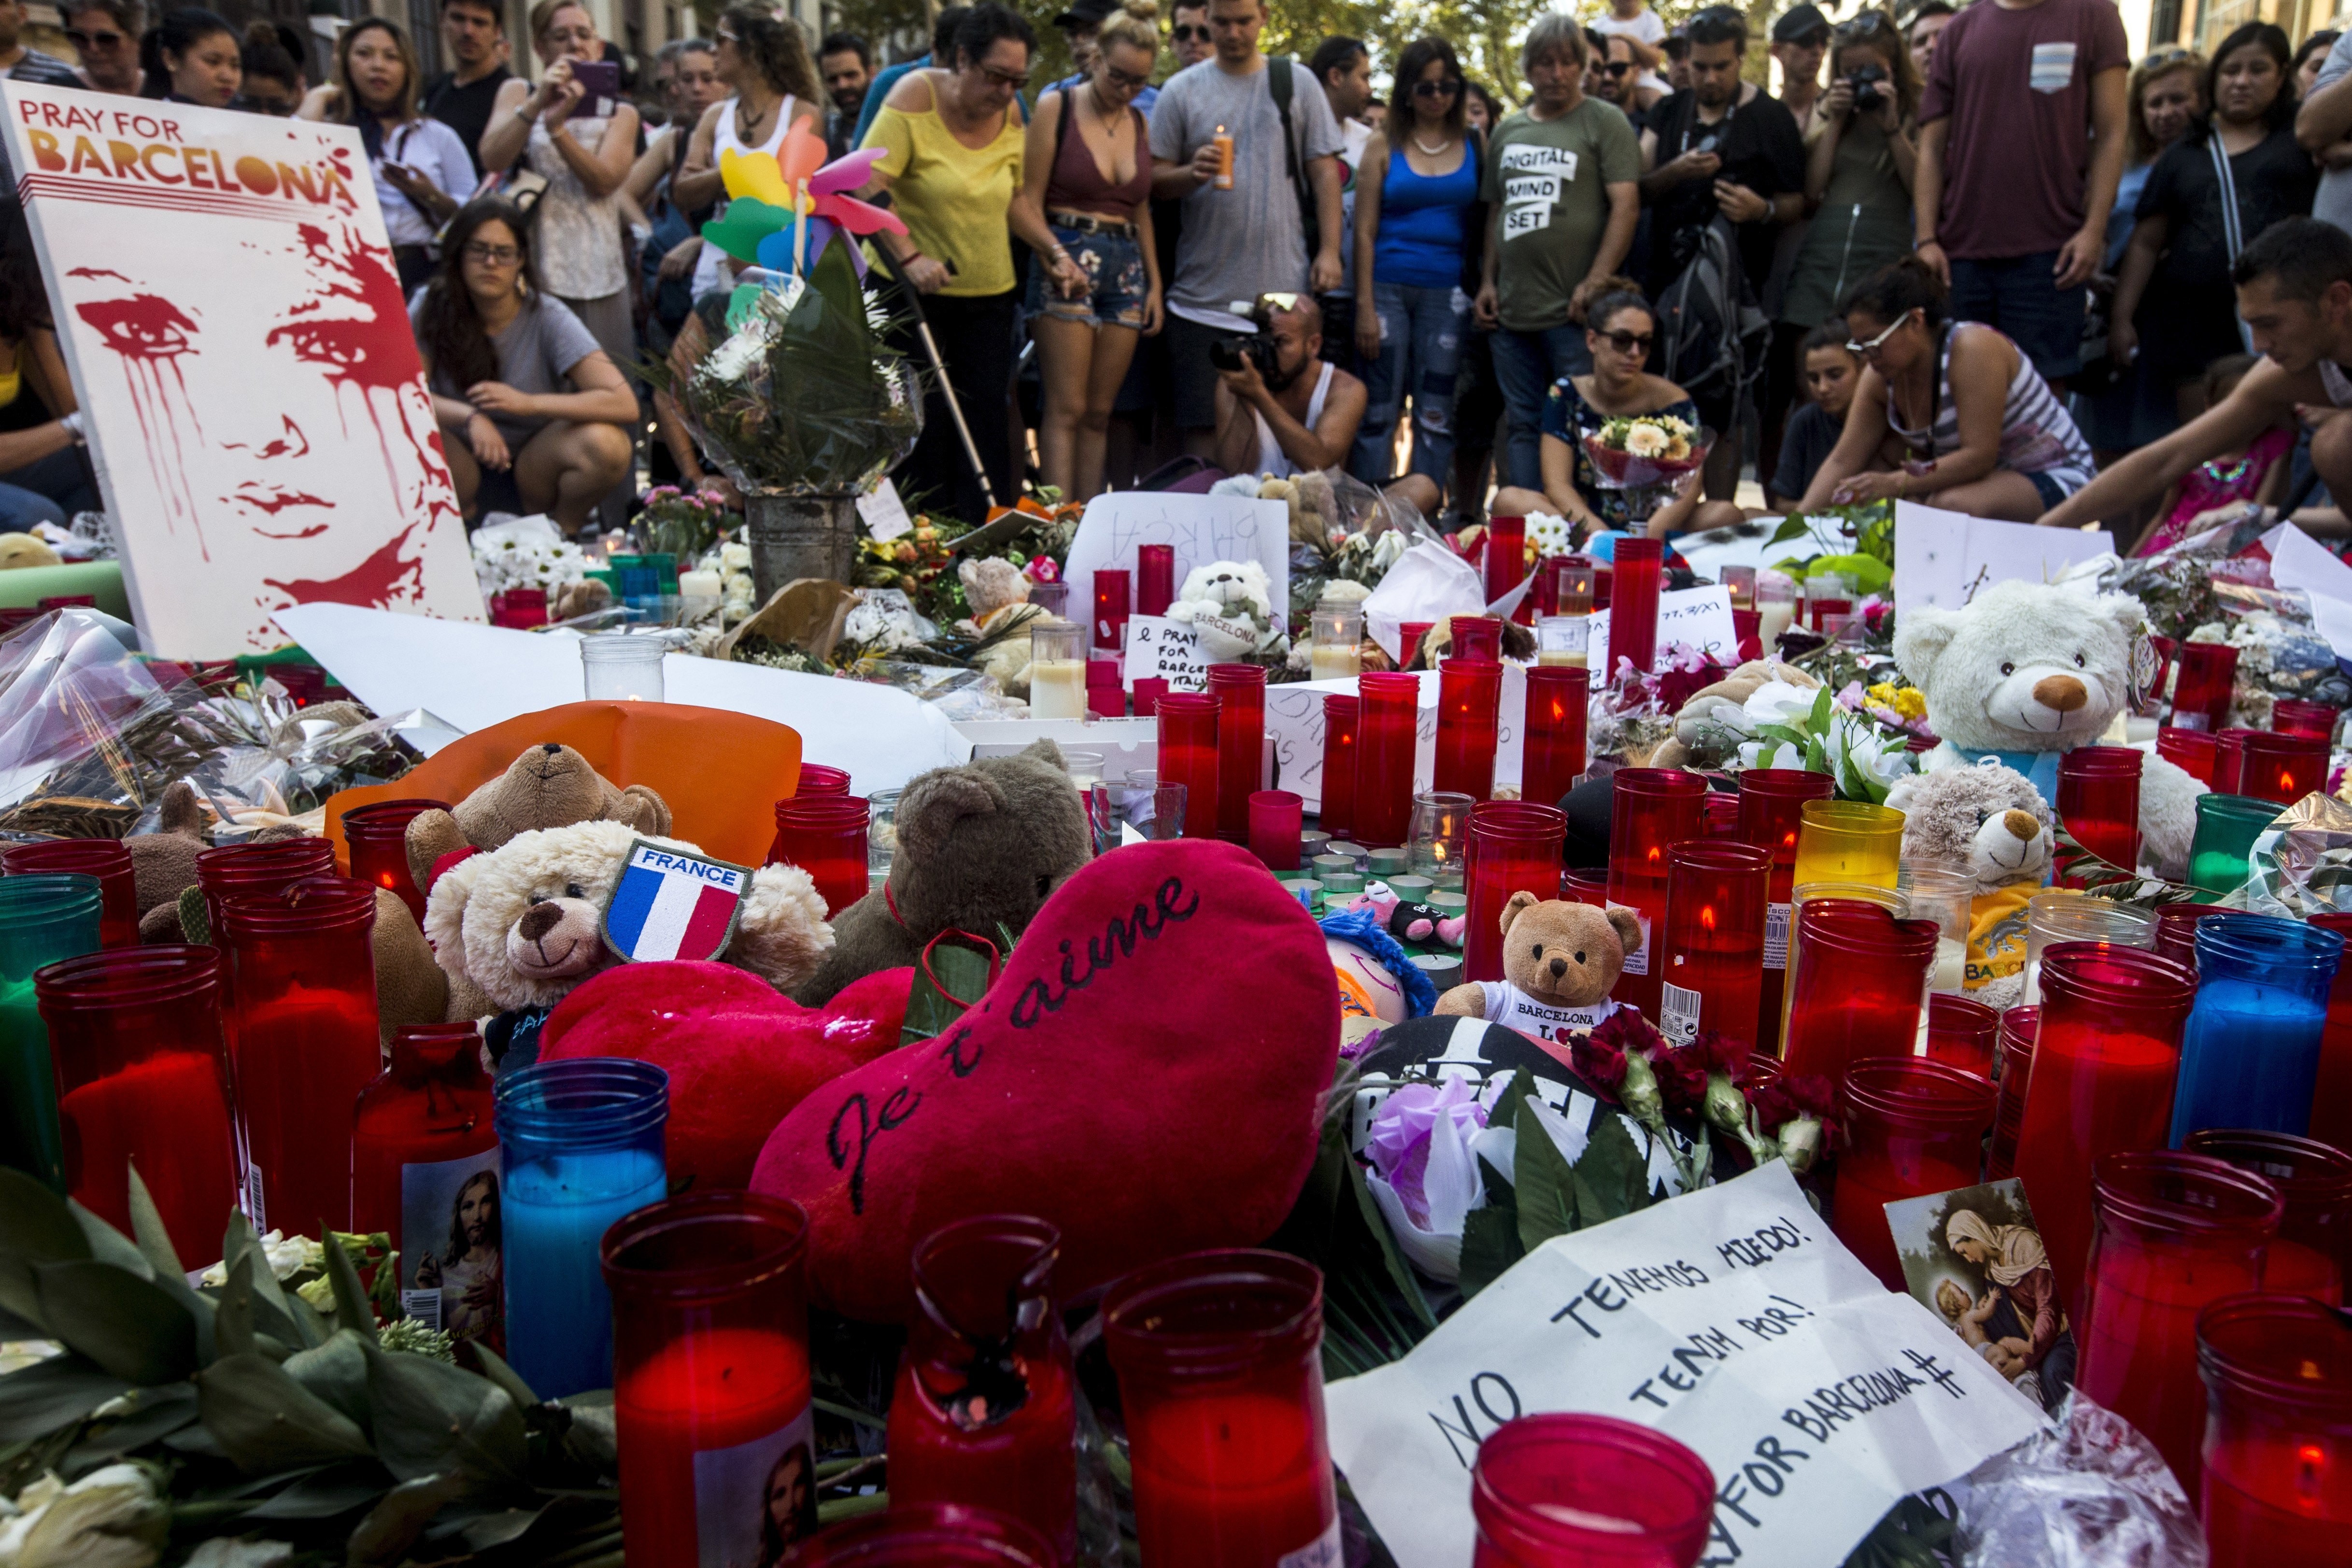 People pay tribute to victims outside the Liceu Theatre, on the site of a deadly van attack in Barcelona, Spain, 18 August 2017. Photo: EPA